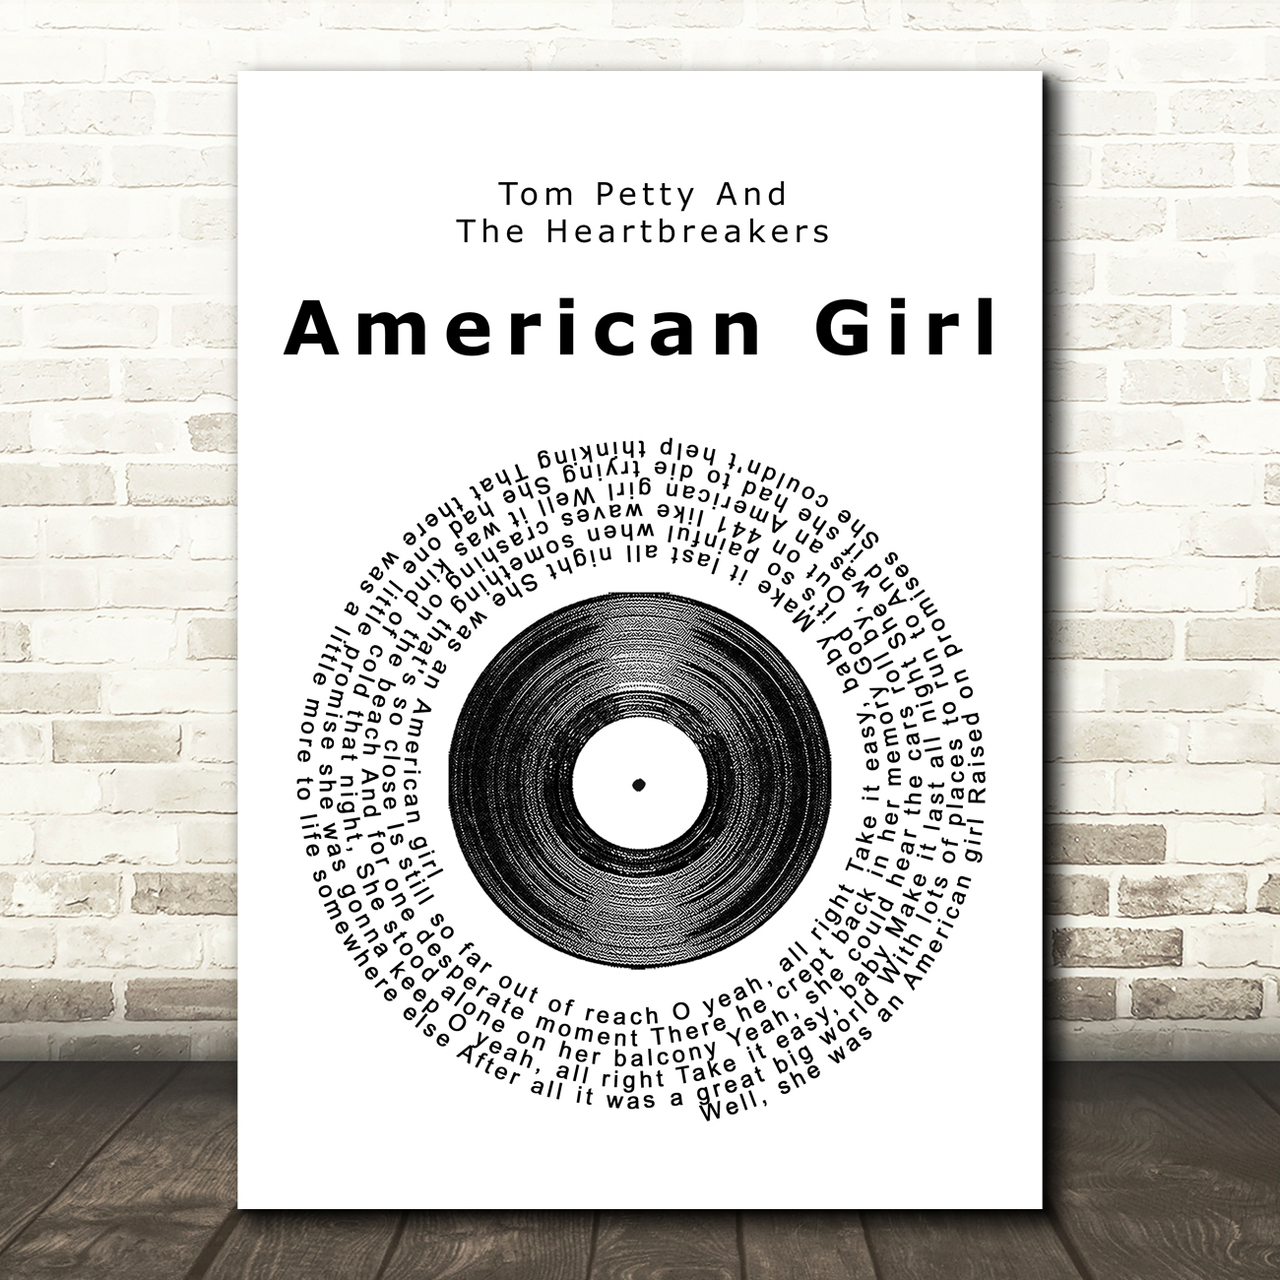 Tom Petty And The Heartbreakers American Girl Vinyl Record Song Lyric Print